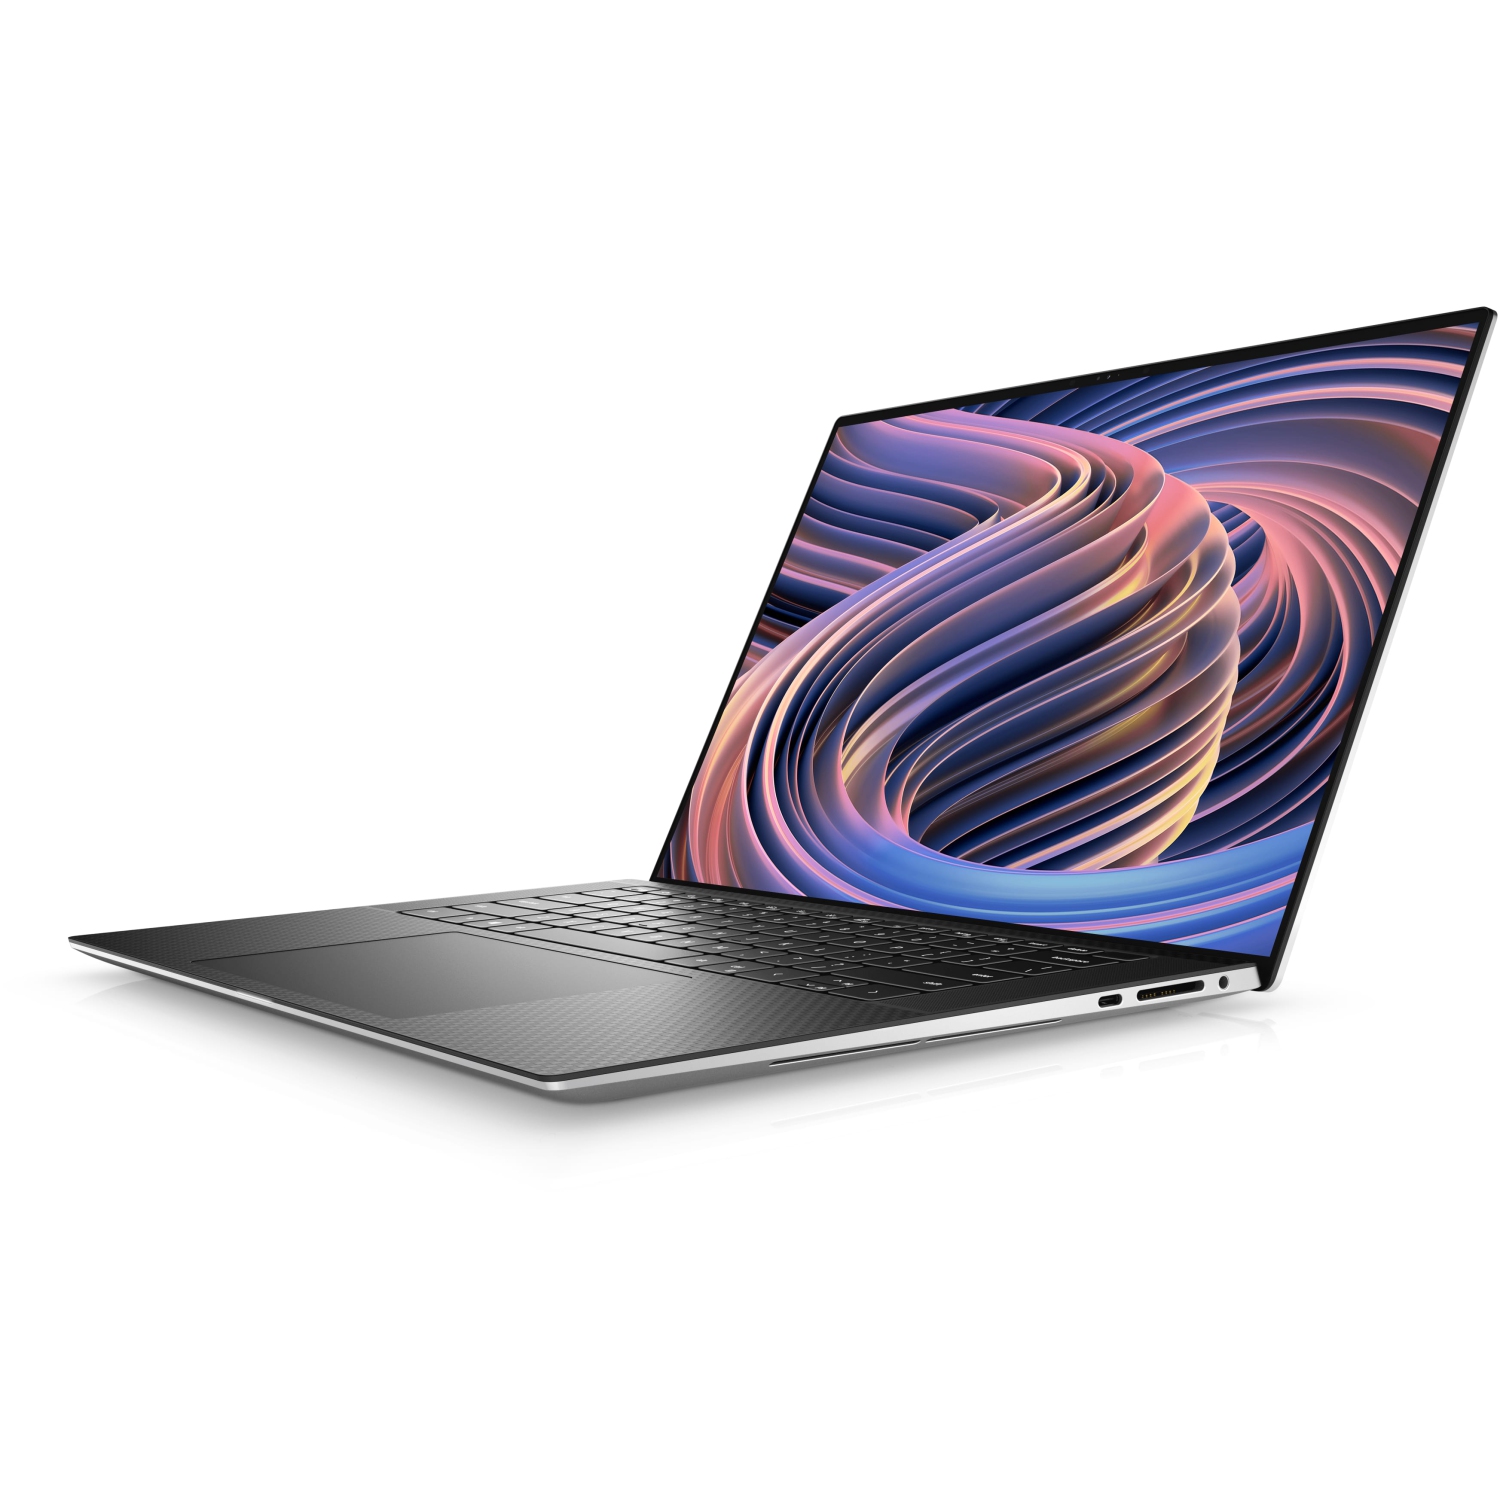 Refurbished (Excellent) – Dell XPS 9520 Laptop (2022) | 15.6" FHD+ | Core i7 - 512GB SSD - 64GB RAM - RTX 3050 | 14 Cores @ 4.7 GHz - 12th Gen CPU